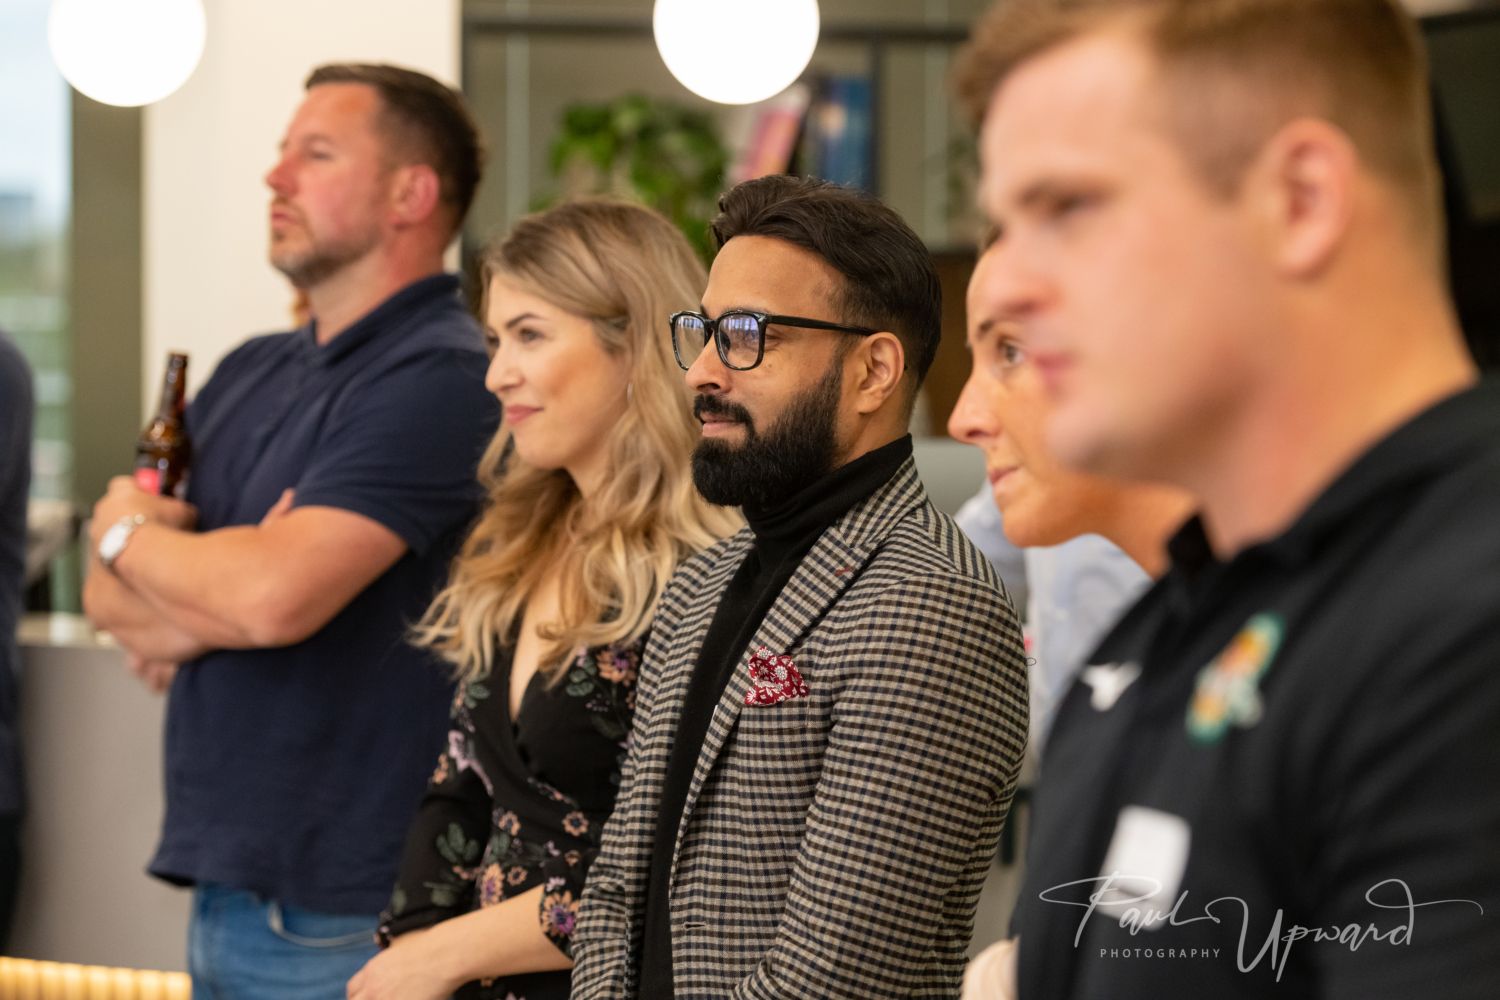 Connect, Collaborate, and Grow: Join us at The Grove, Hammersmith